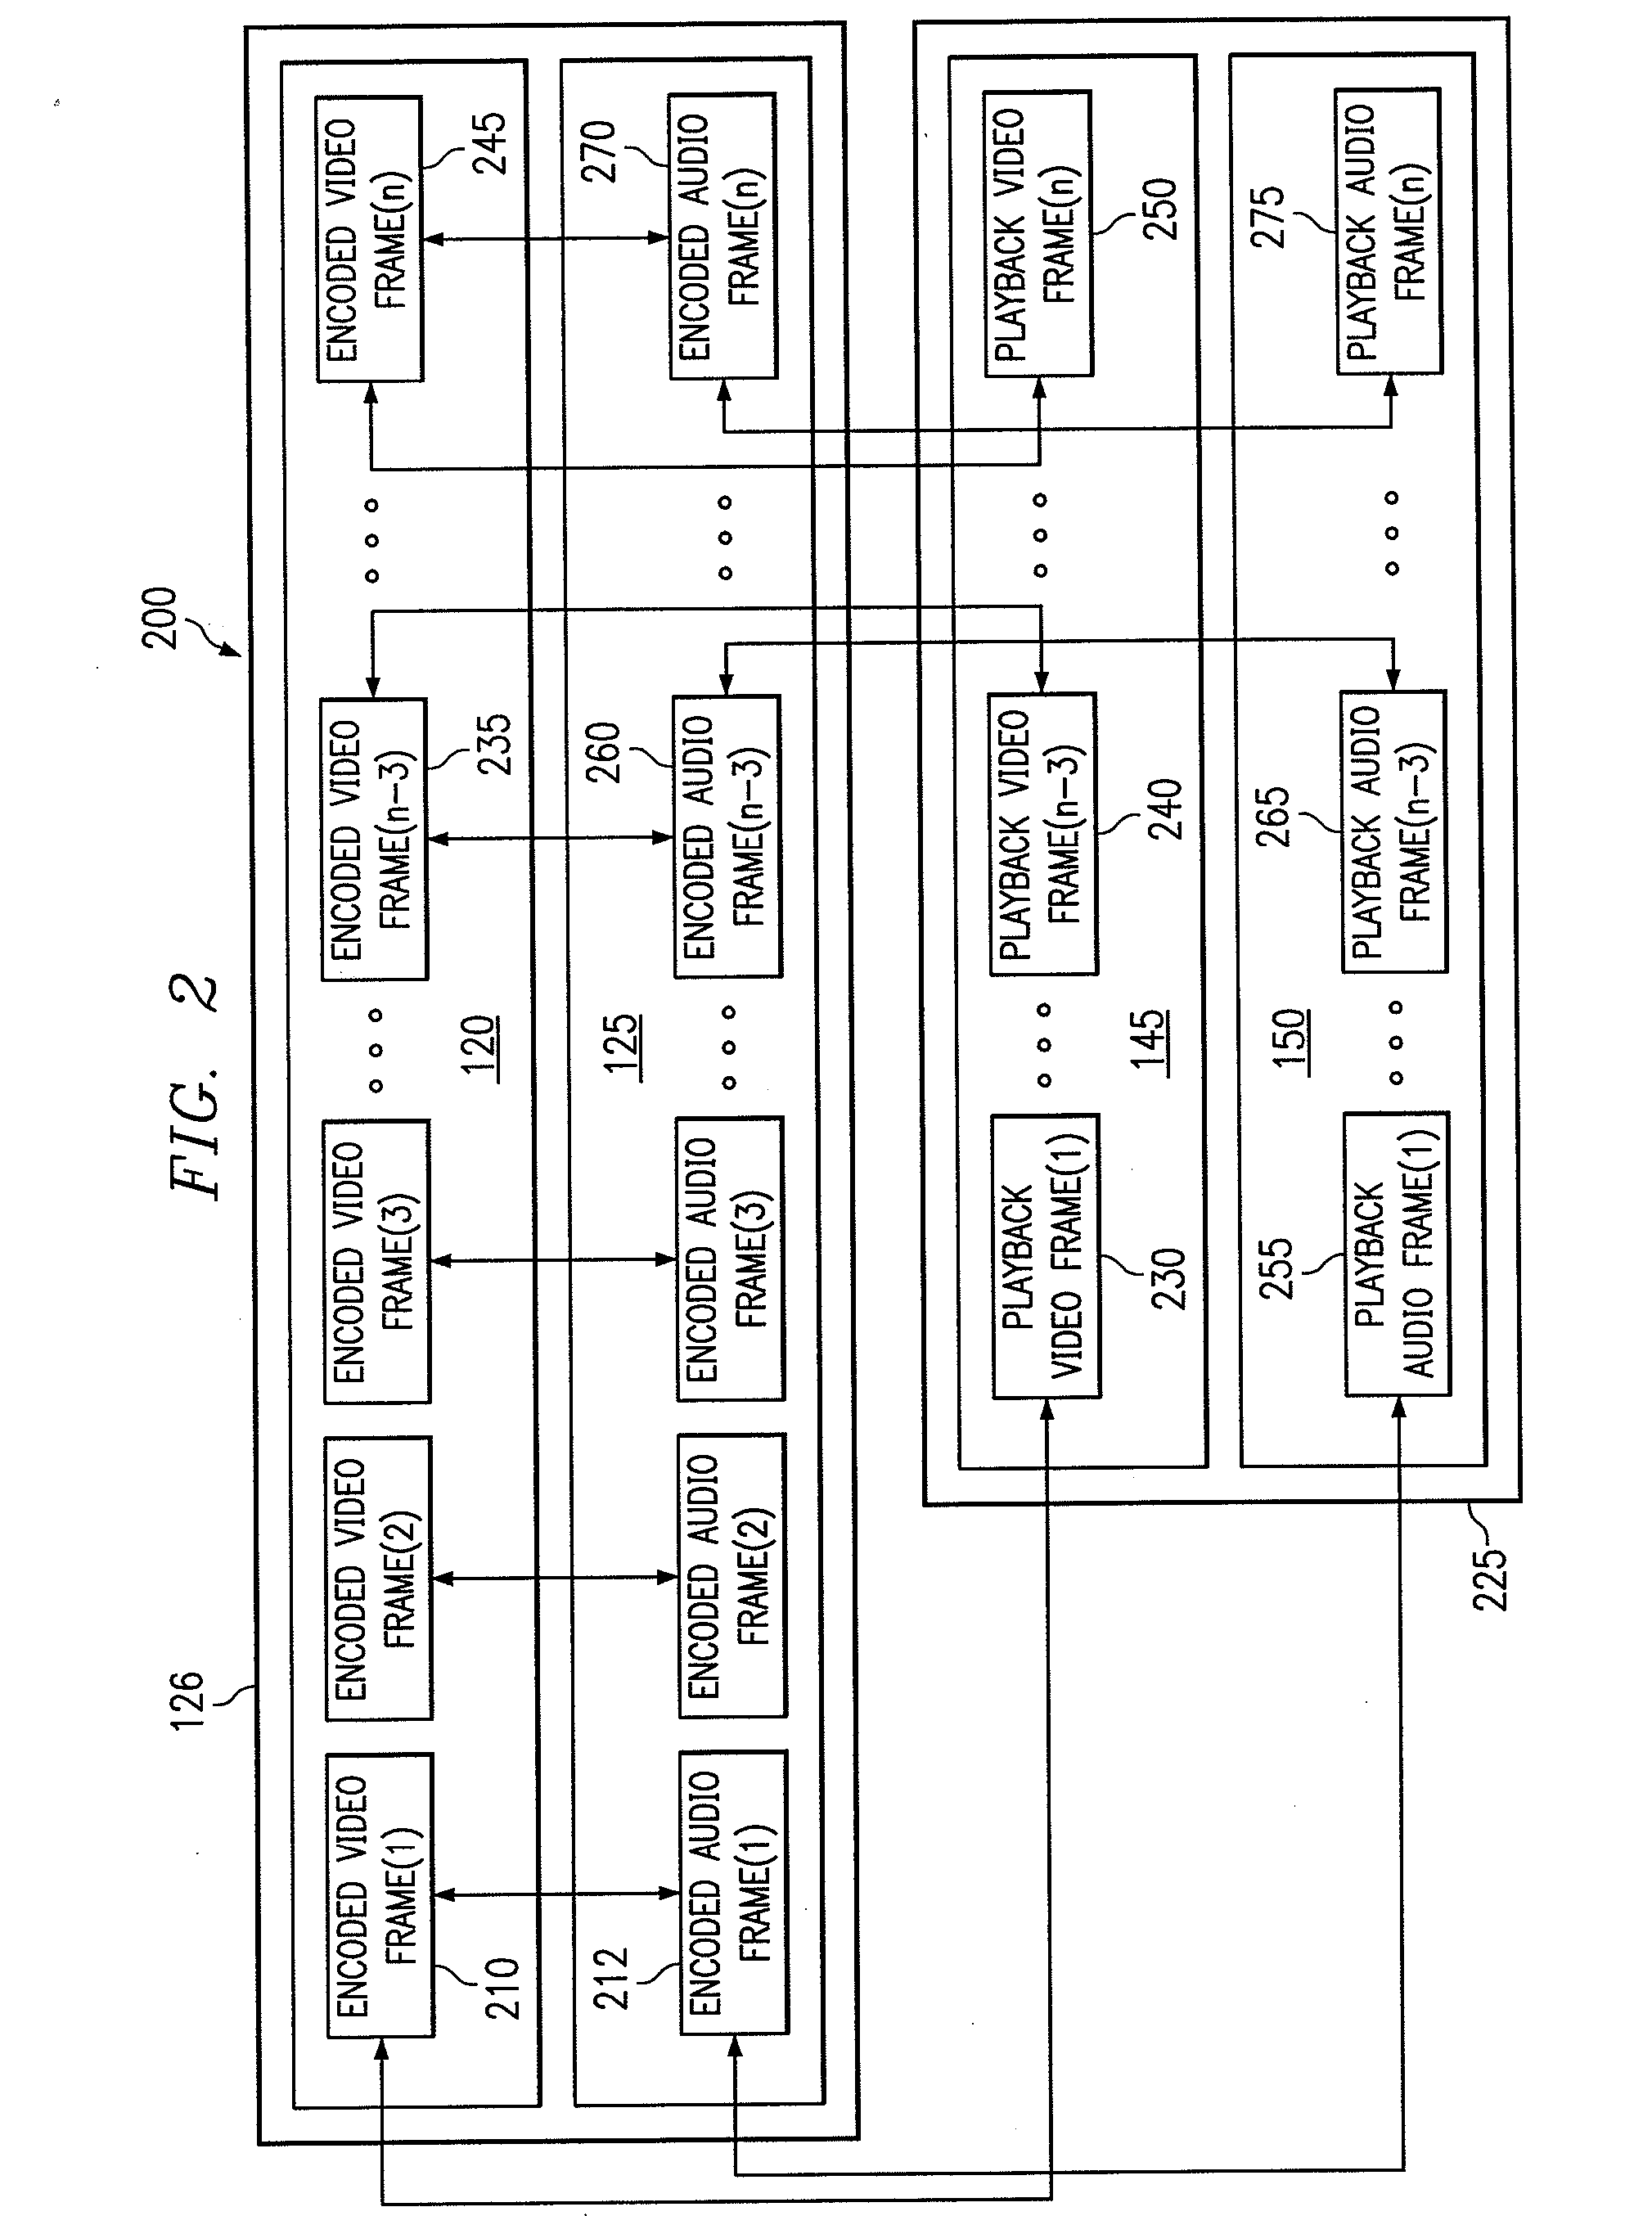 Systems and computer program products to facilitate efficient transmission and playback of digital information